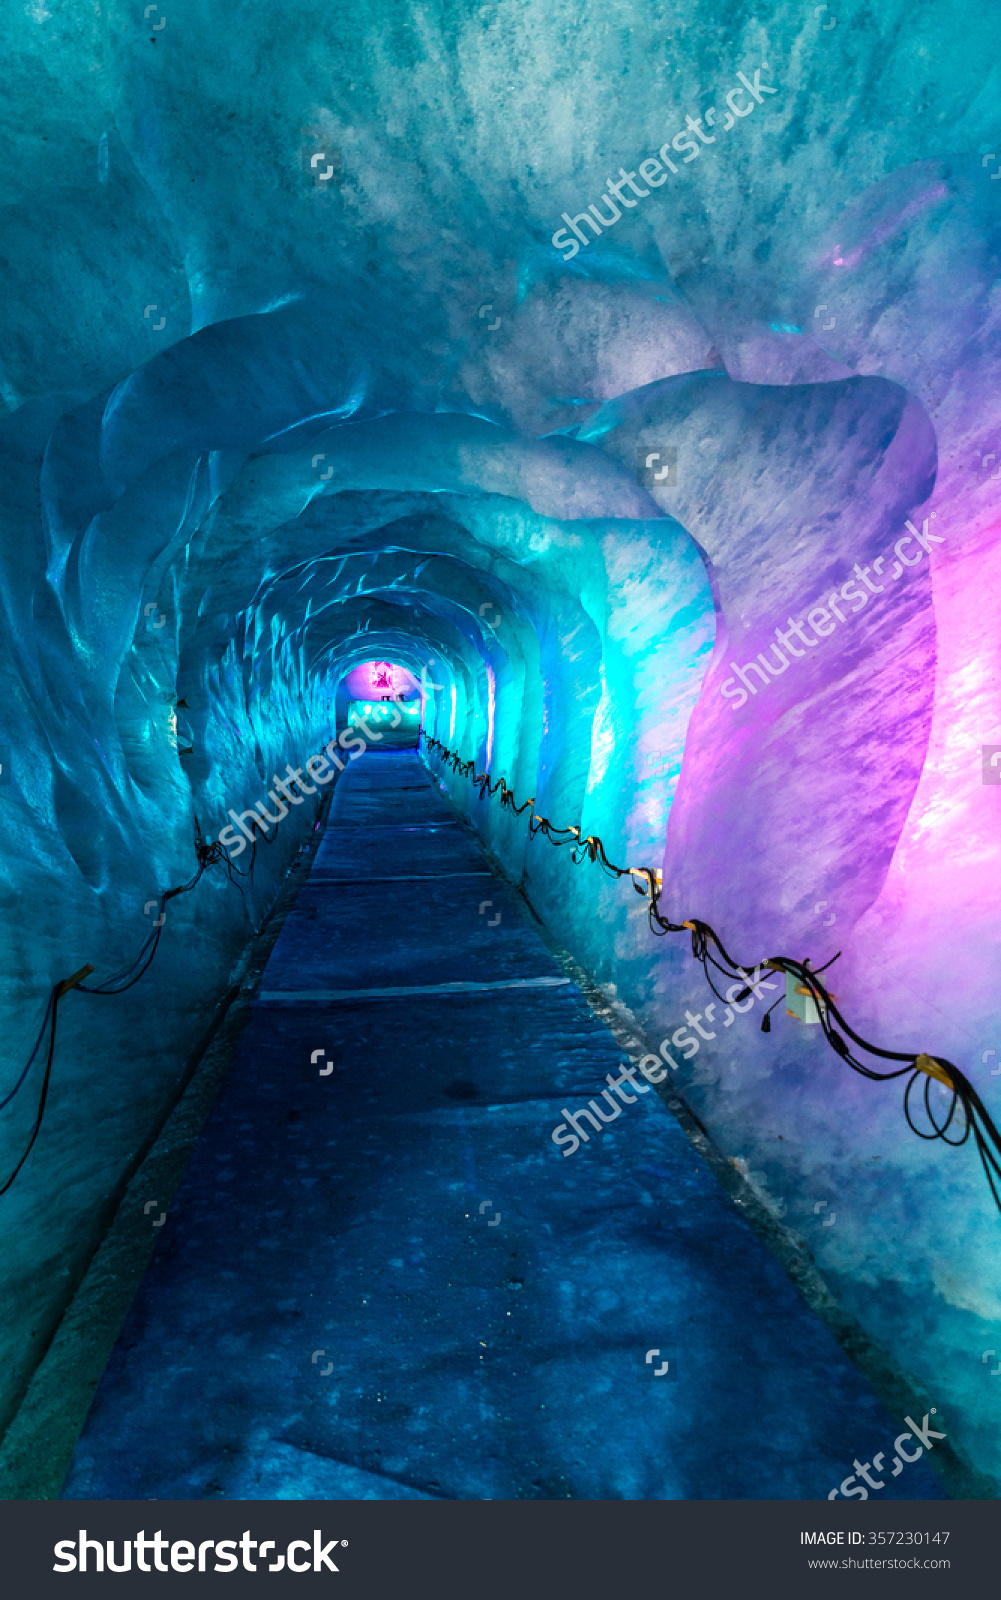 Colorful Icy Corridor Ice Cave Digged Stock Photo 357230147.